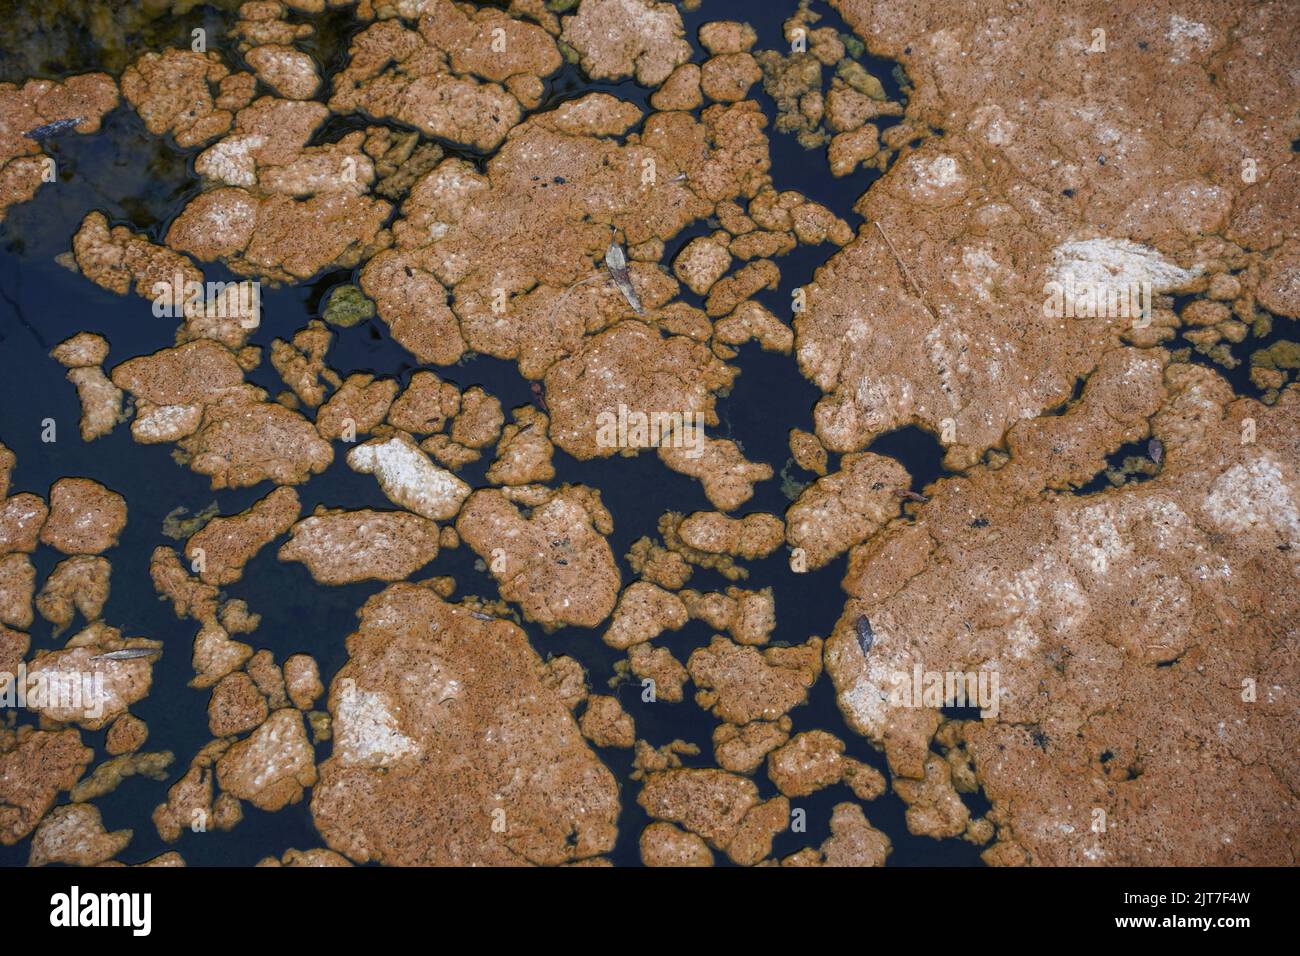 Blooming Brown Algae on stagnated water surface in a river. Stock Photo